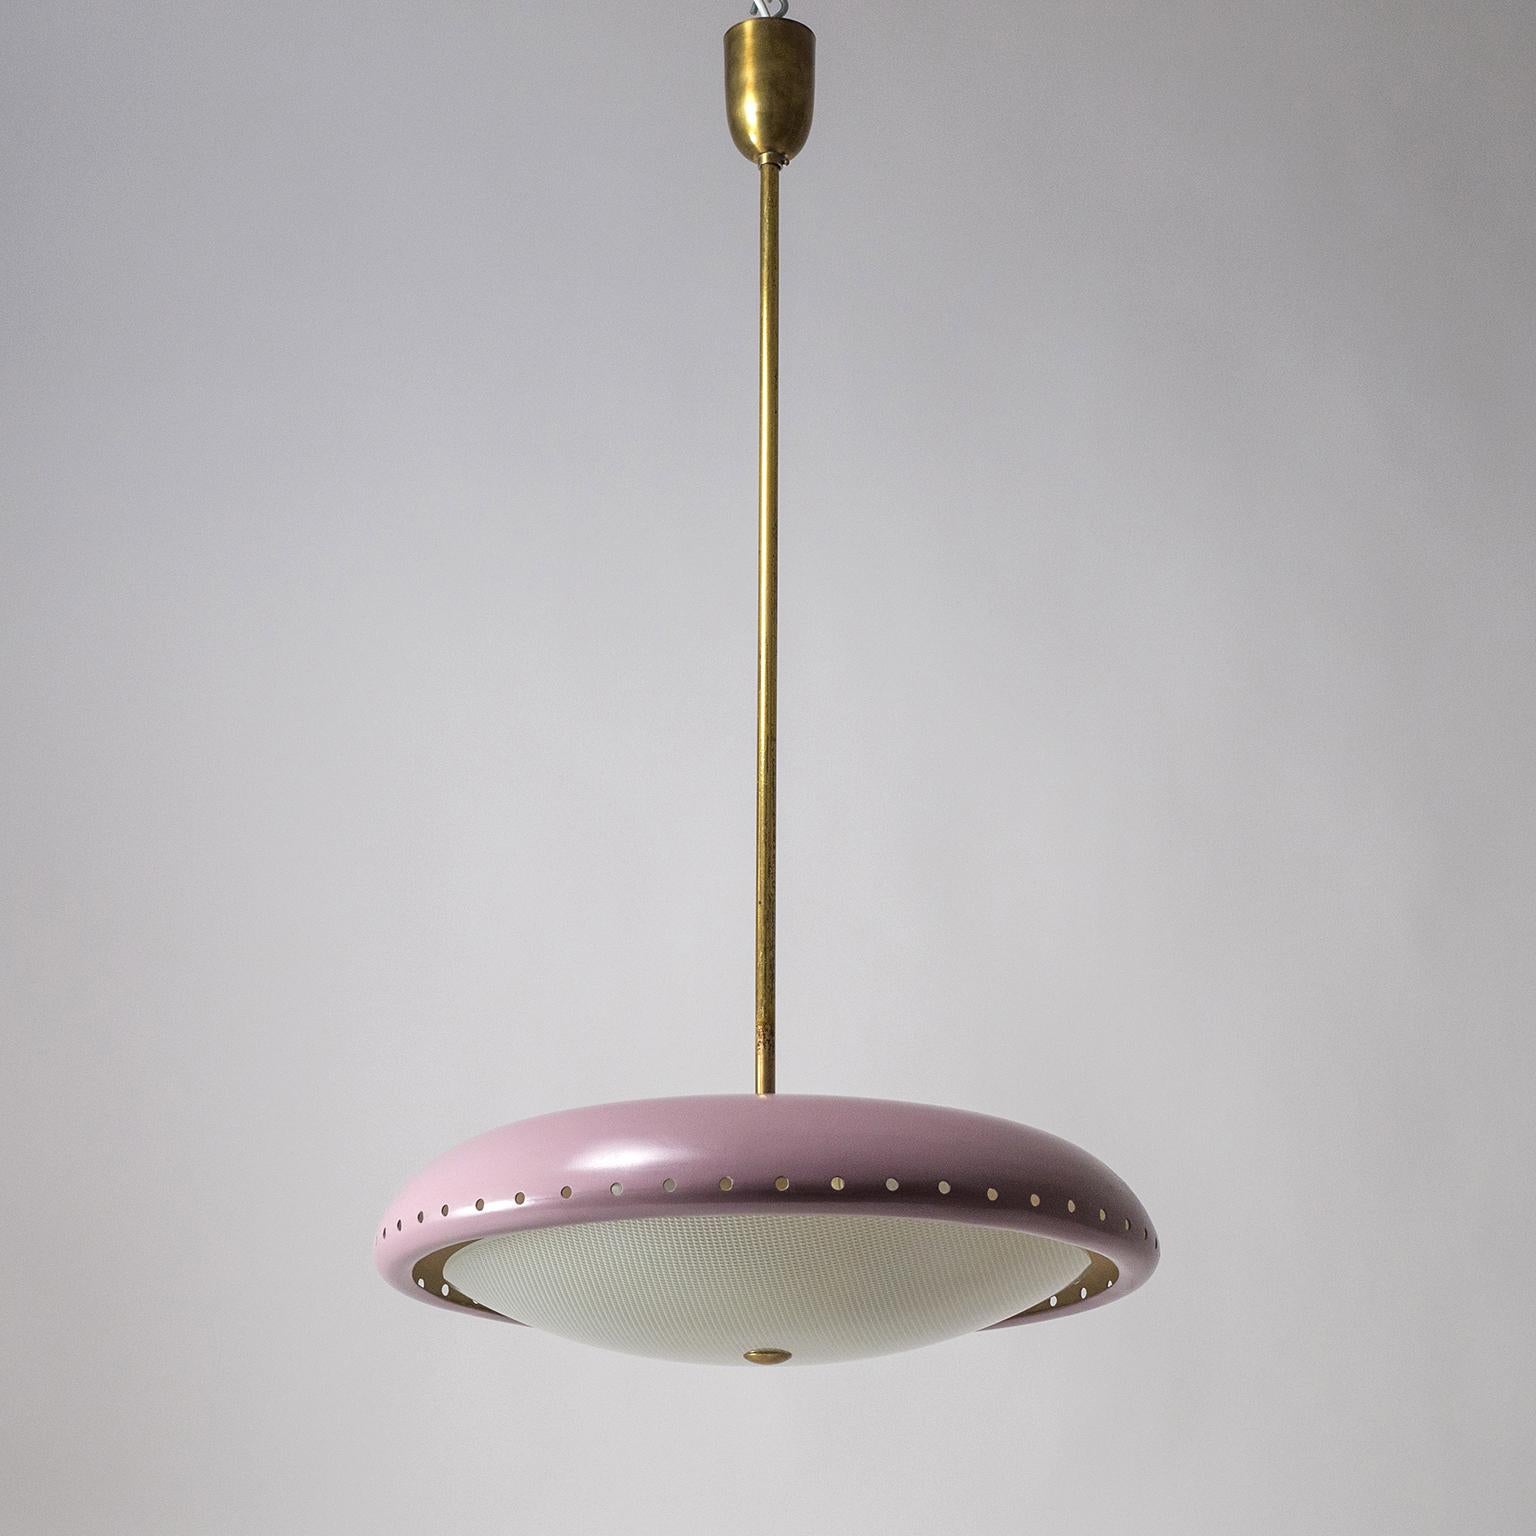 Rare modernist 'UFO' chandelier by Fontana Arte from the 1950s. Brass hardware with a large lavender lacquered perforated shade and a geometrically textured glass diffuser. Very nice condition with some light wear to the paint and a nicely aged